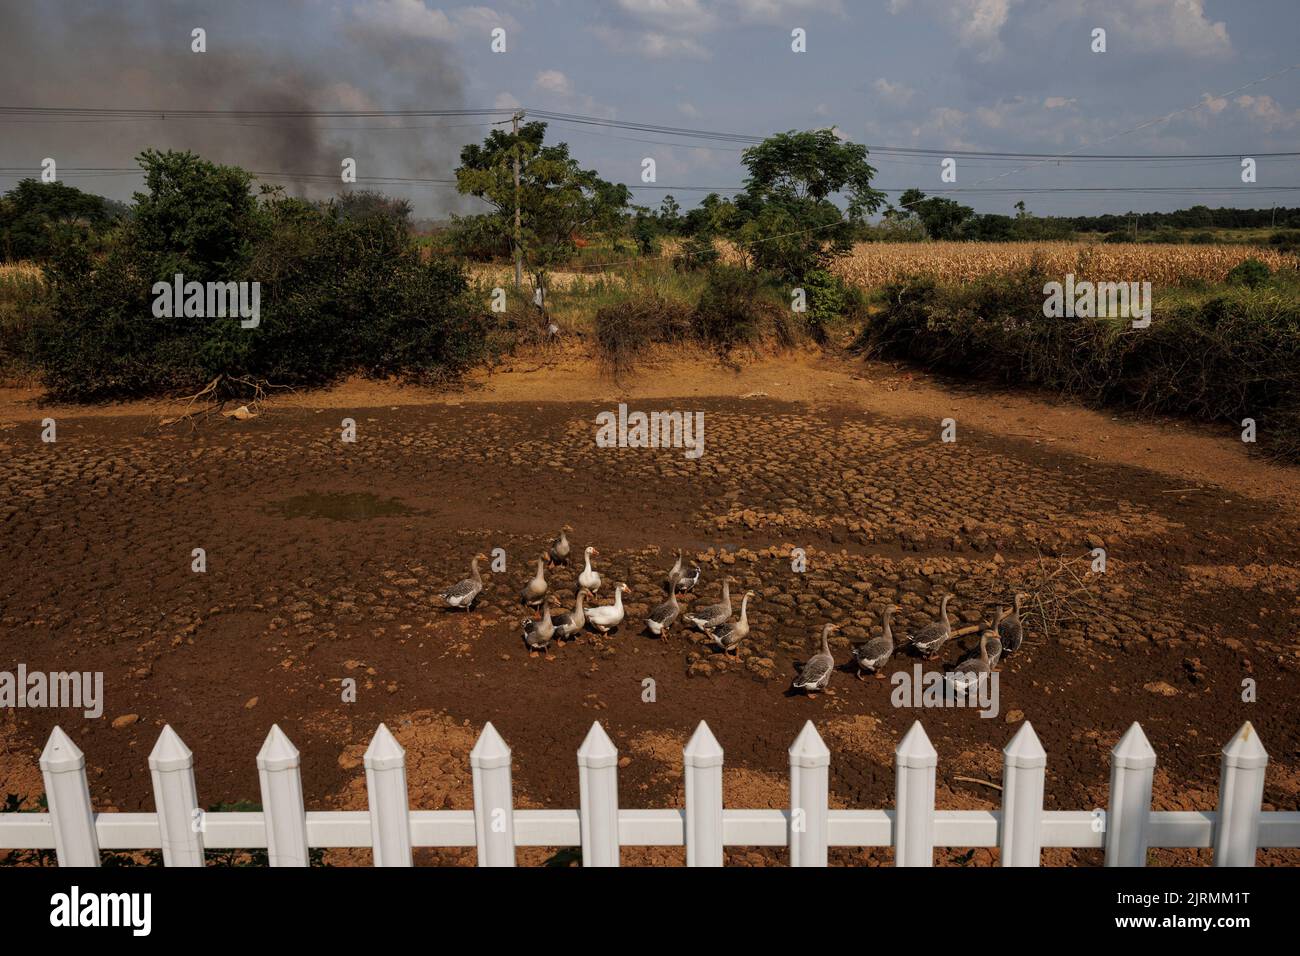 A gaggle of geese walk in the dried-up village pond as a brush fire that rages nearby during a drought in Xinyao village, Nanchang city, Jiangxi province, China, August 25, 2022.  REUTERS/Thomas Peter Stock Photo